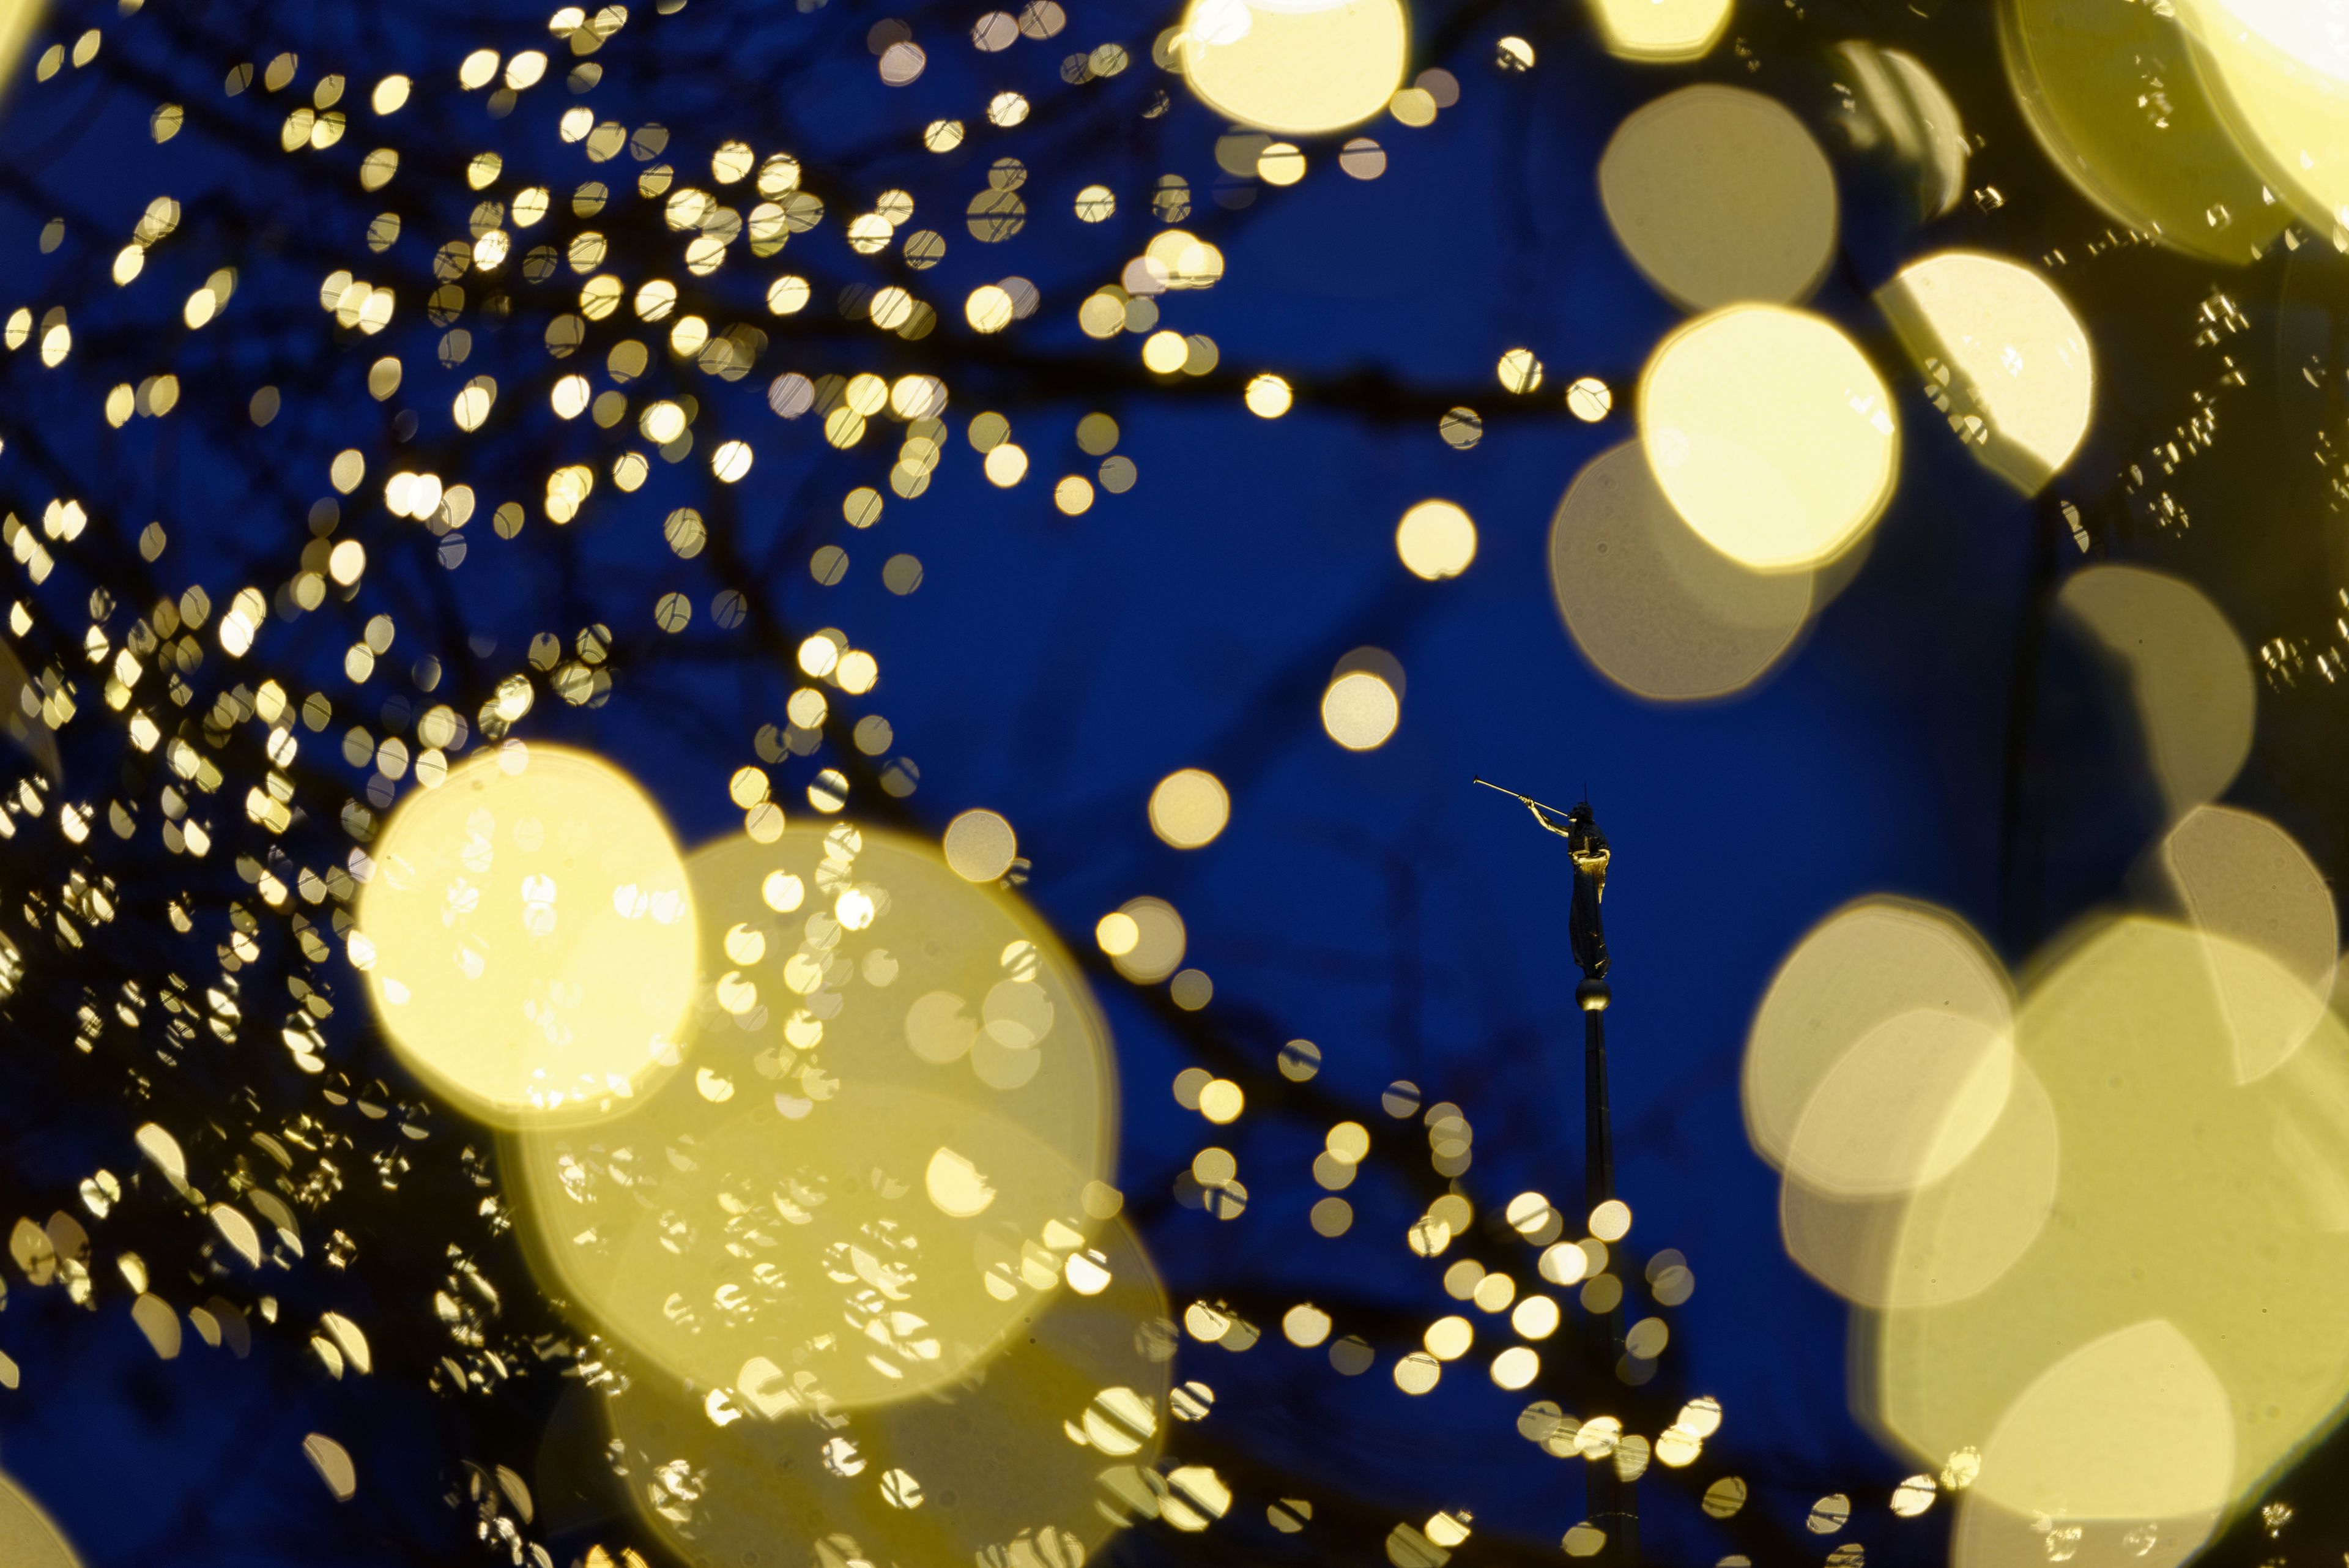 A close-up view of Christmas lights with an angel Moroni statue in the background.